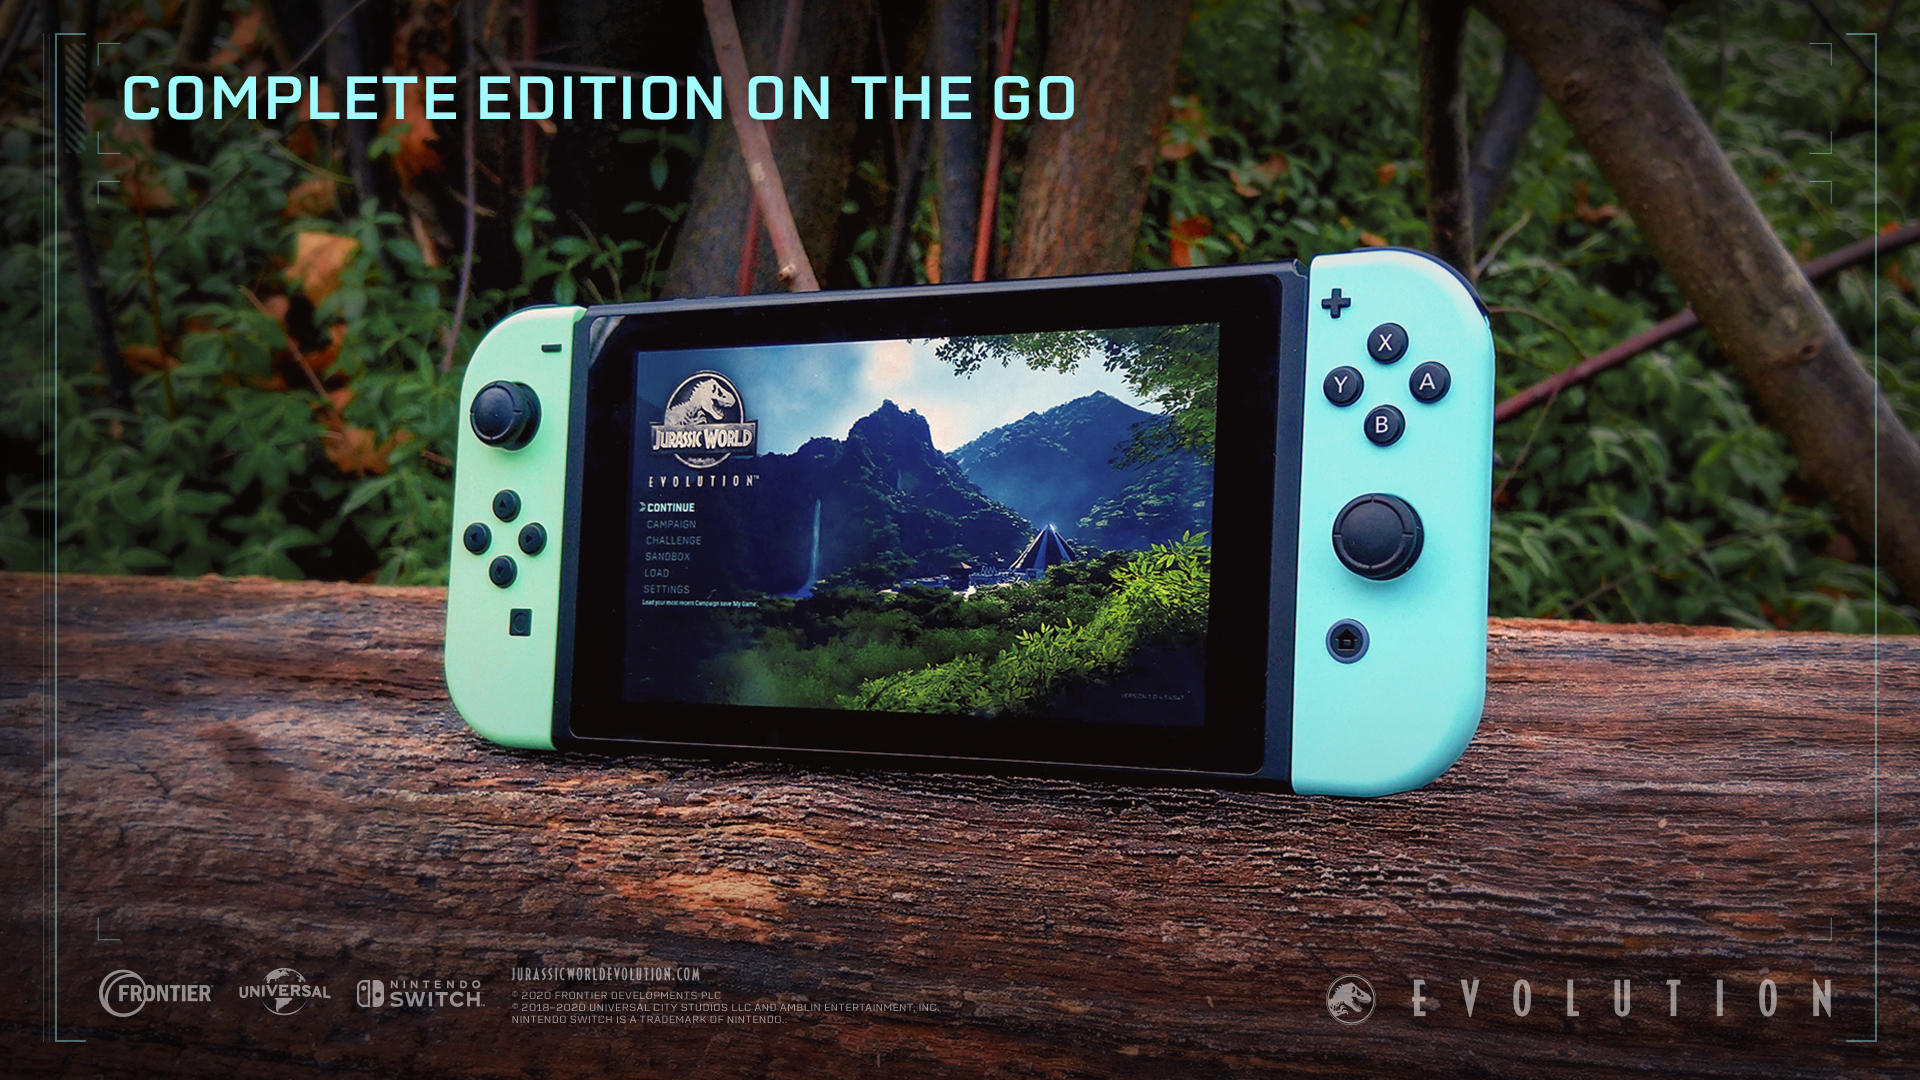 Jurassic World Evolution 2 on "Jurassic World Evolution: Complete Edition can be played anytime, anywhere on Switch. Community Manager Jens takes his console with him wherever he goes, so